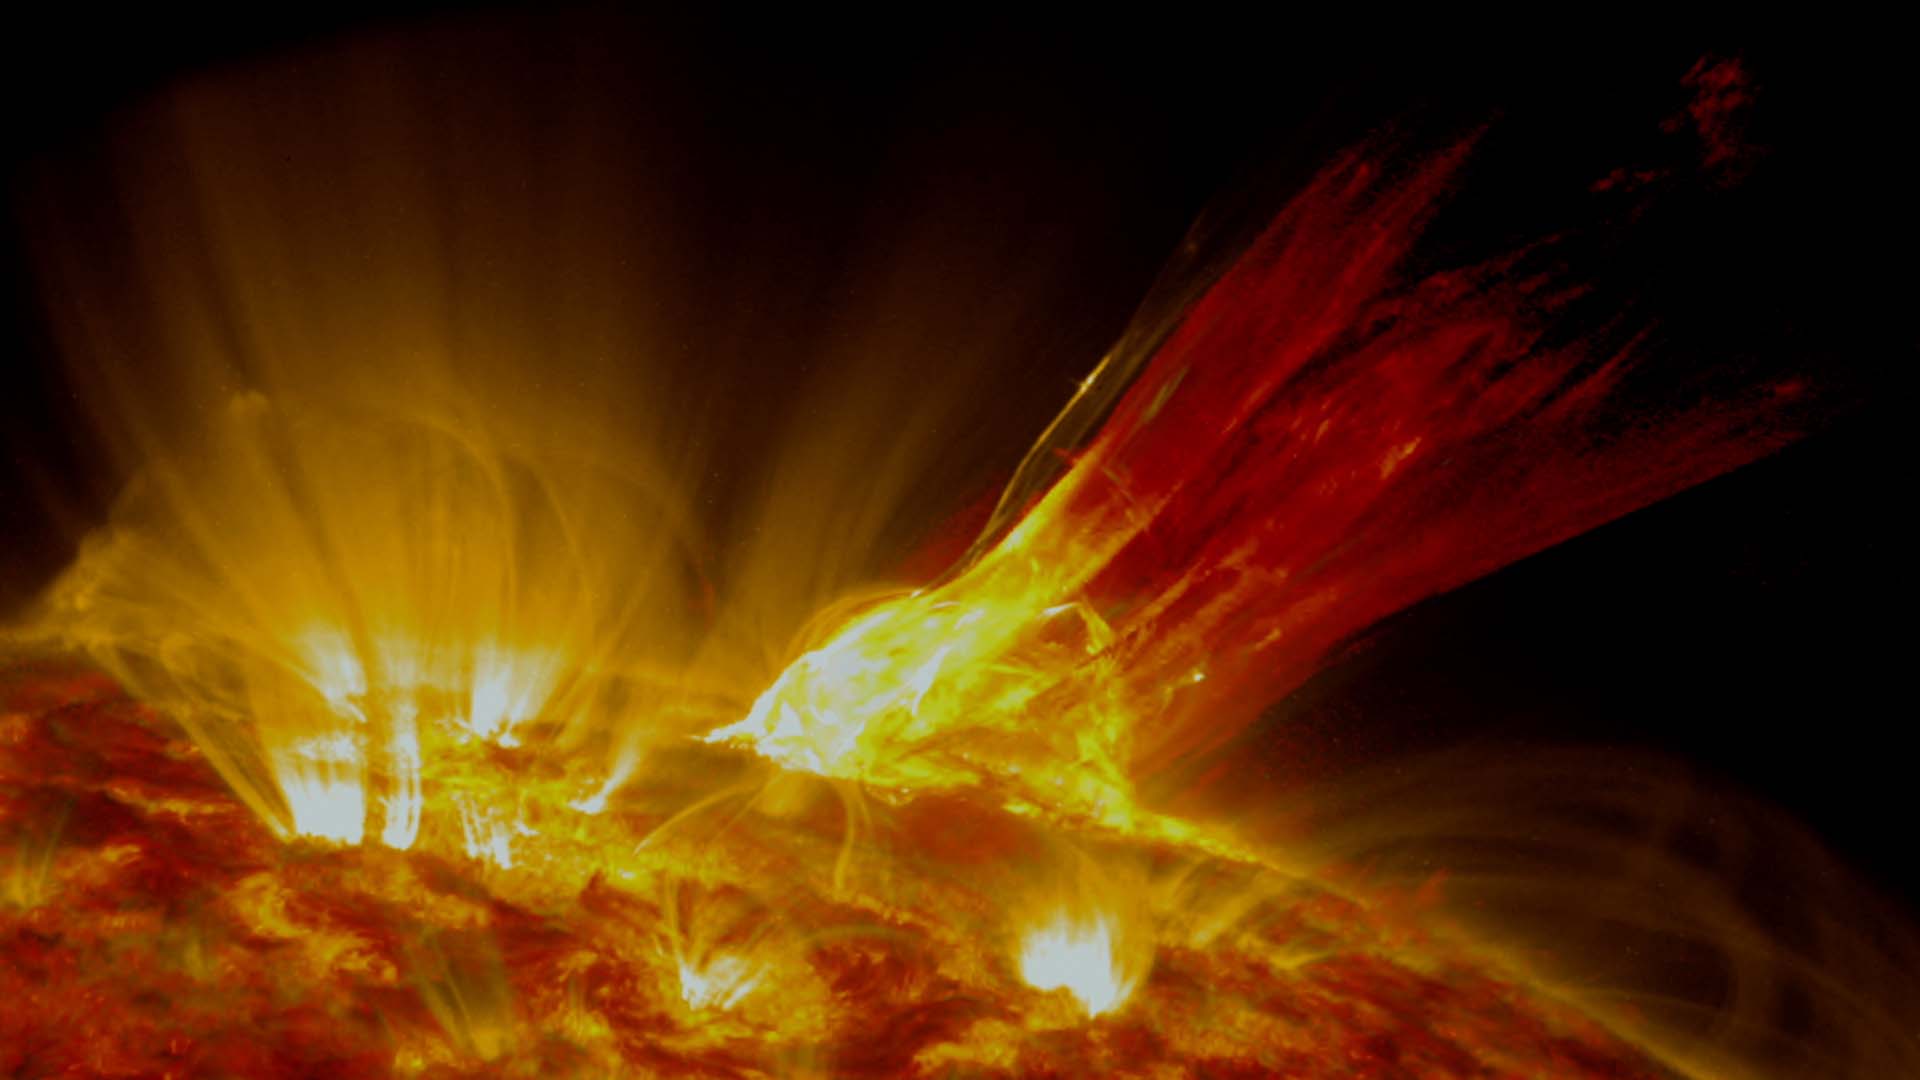 Edited video of a solar prominence seen by NASA's Solar Dynamics Observatory on April 21, 2015. Watch this video on the NASAexplorer YouTube channel.